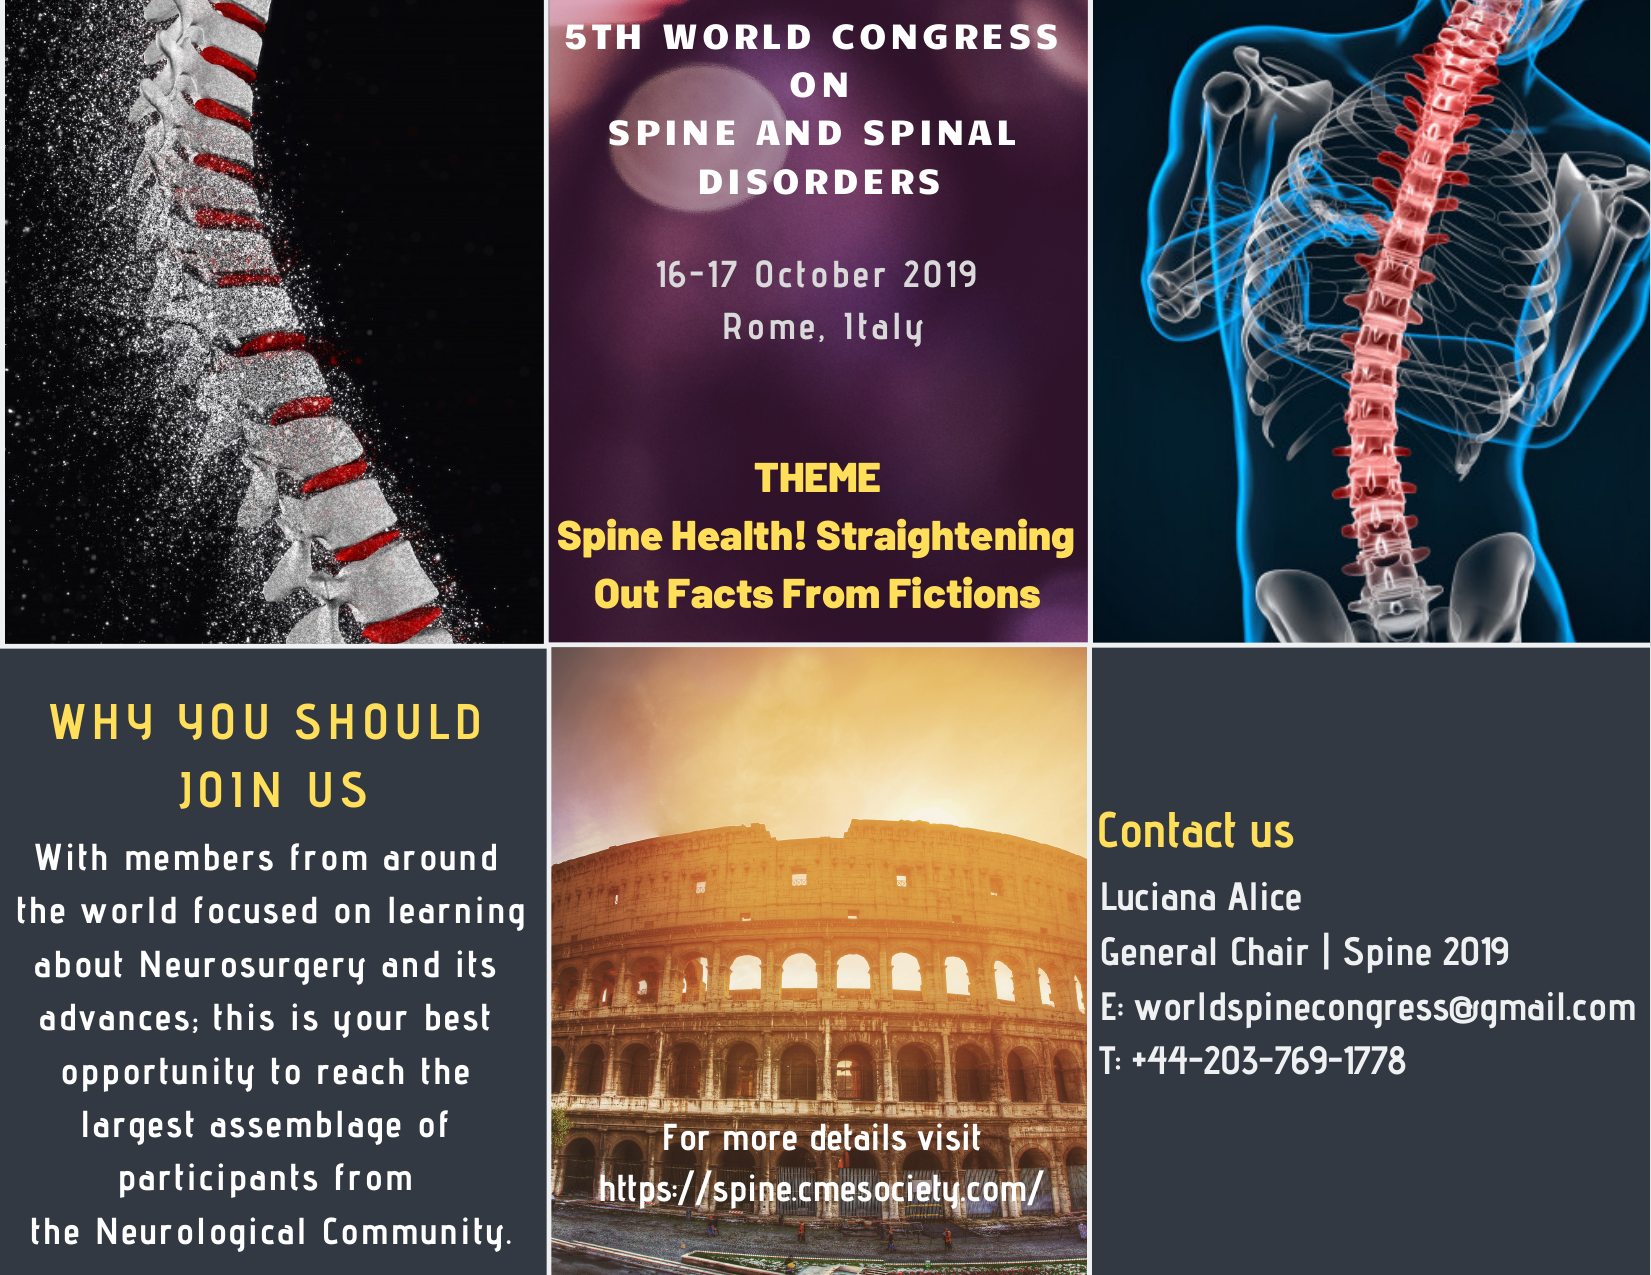 5th World Congress on Spine and Spinal Disorders, Rome, Italy